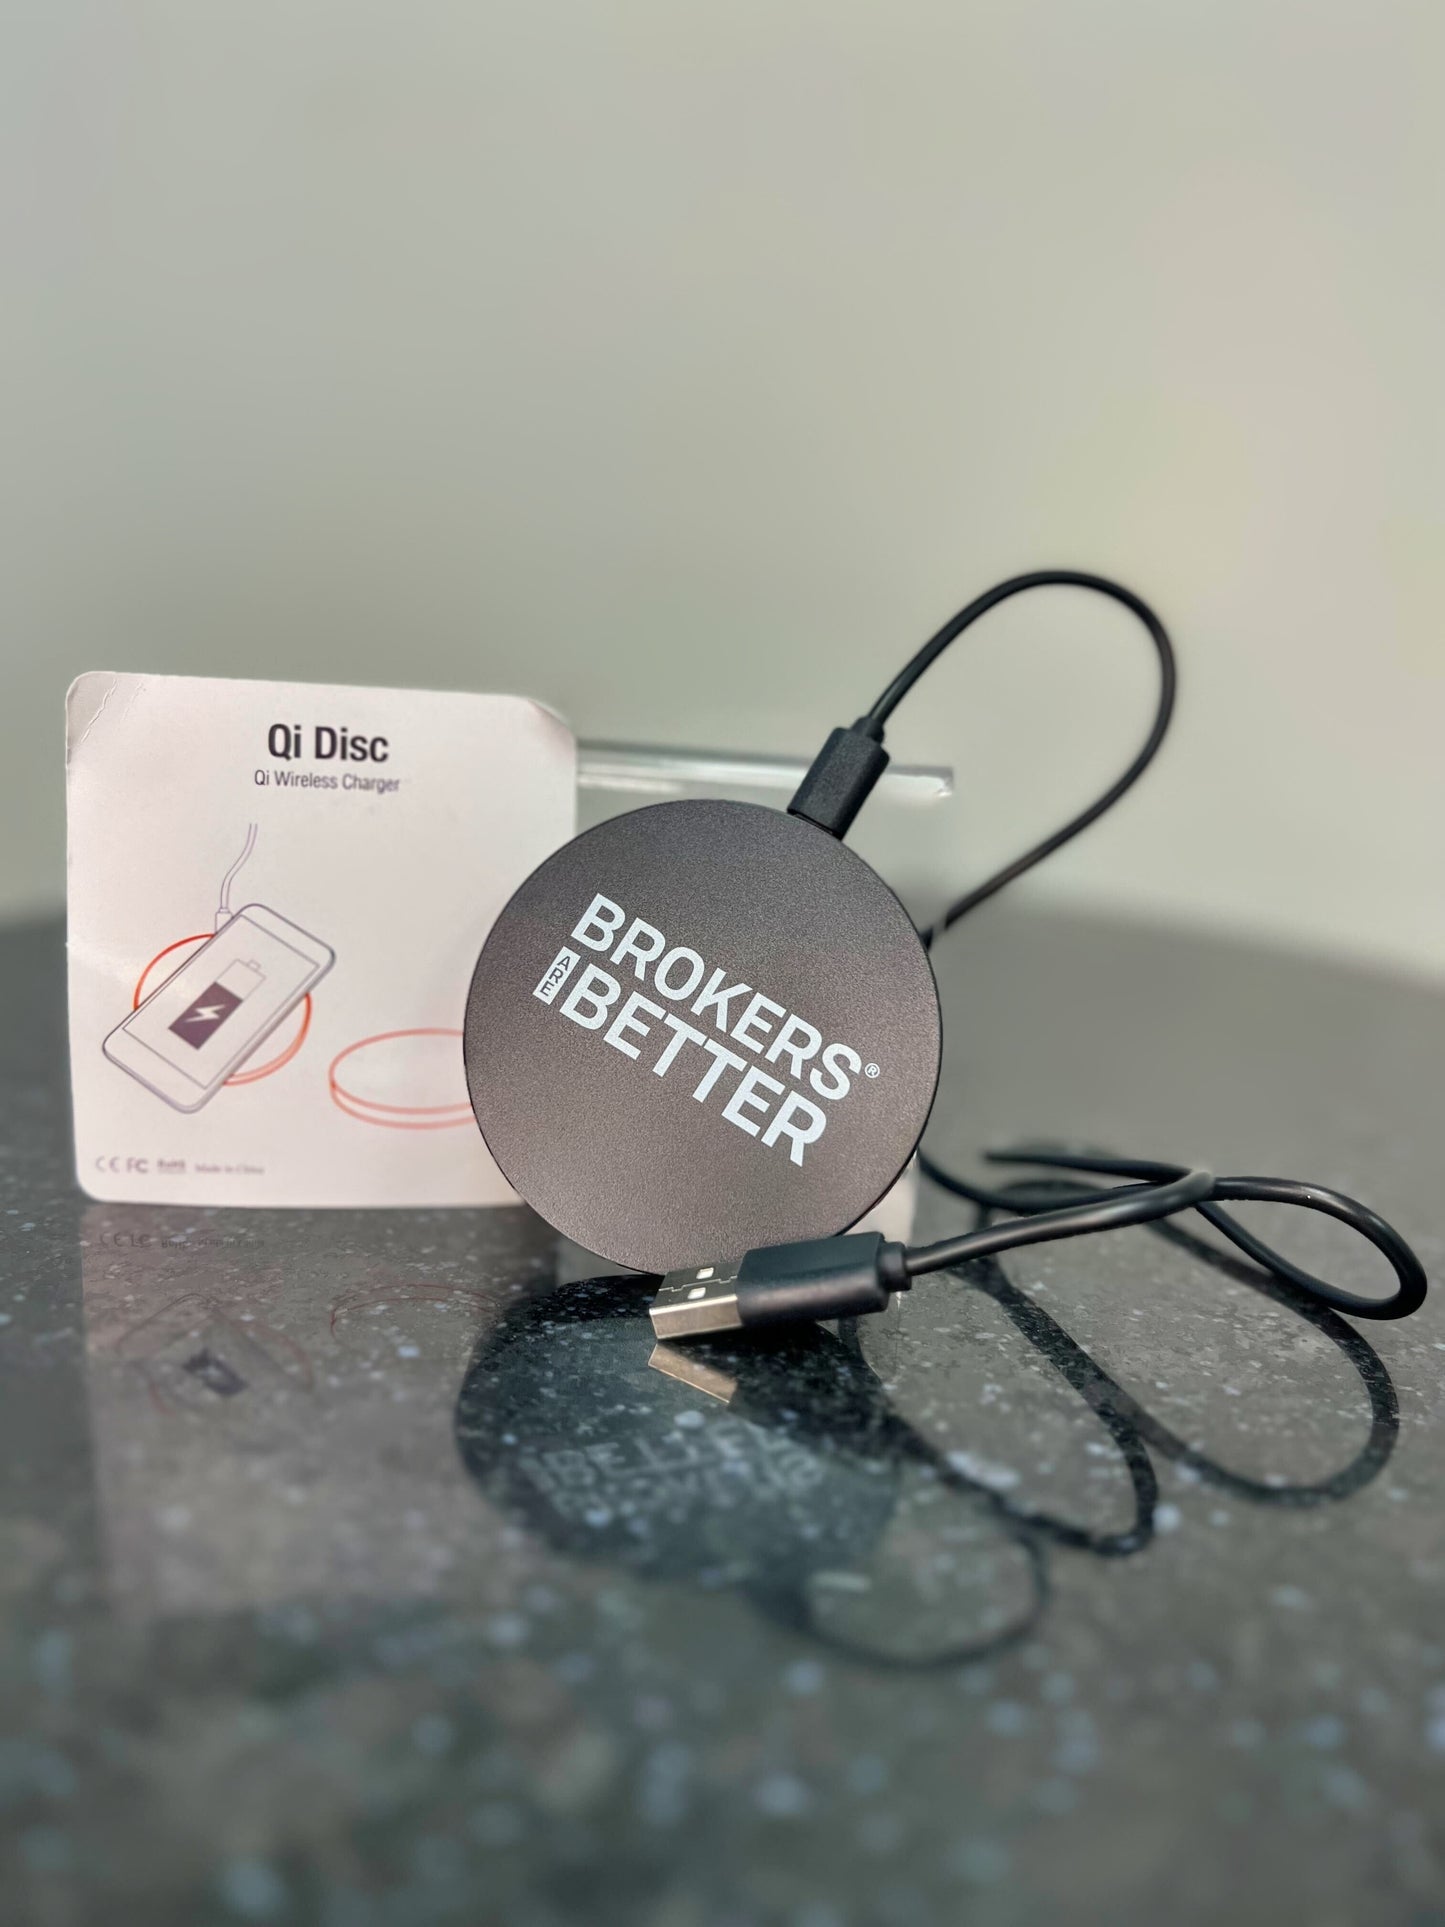 Brokers are Better Qi Charger